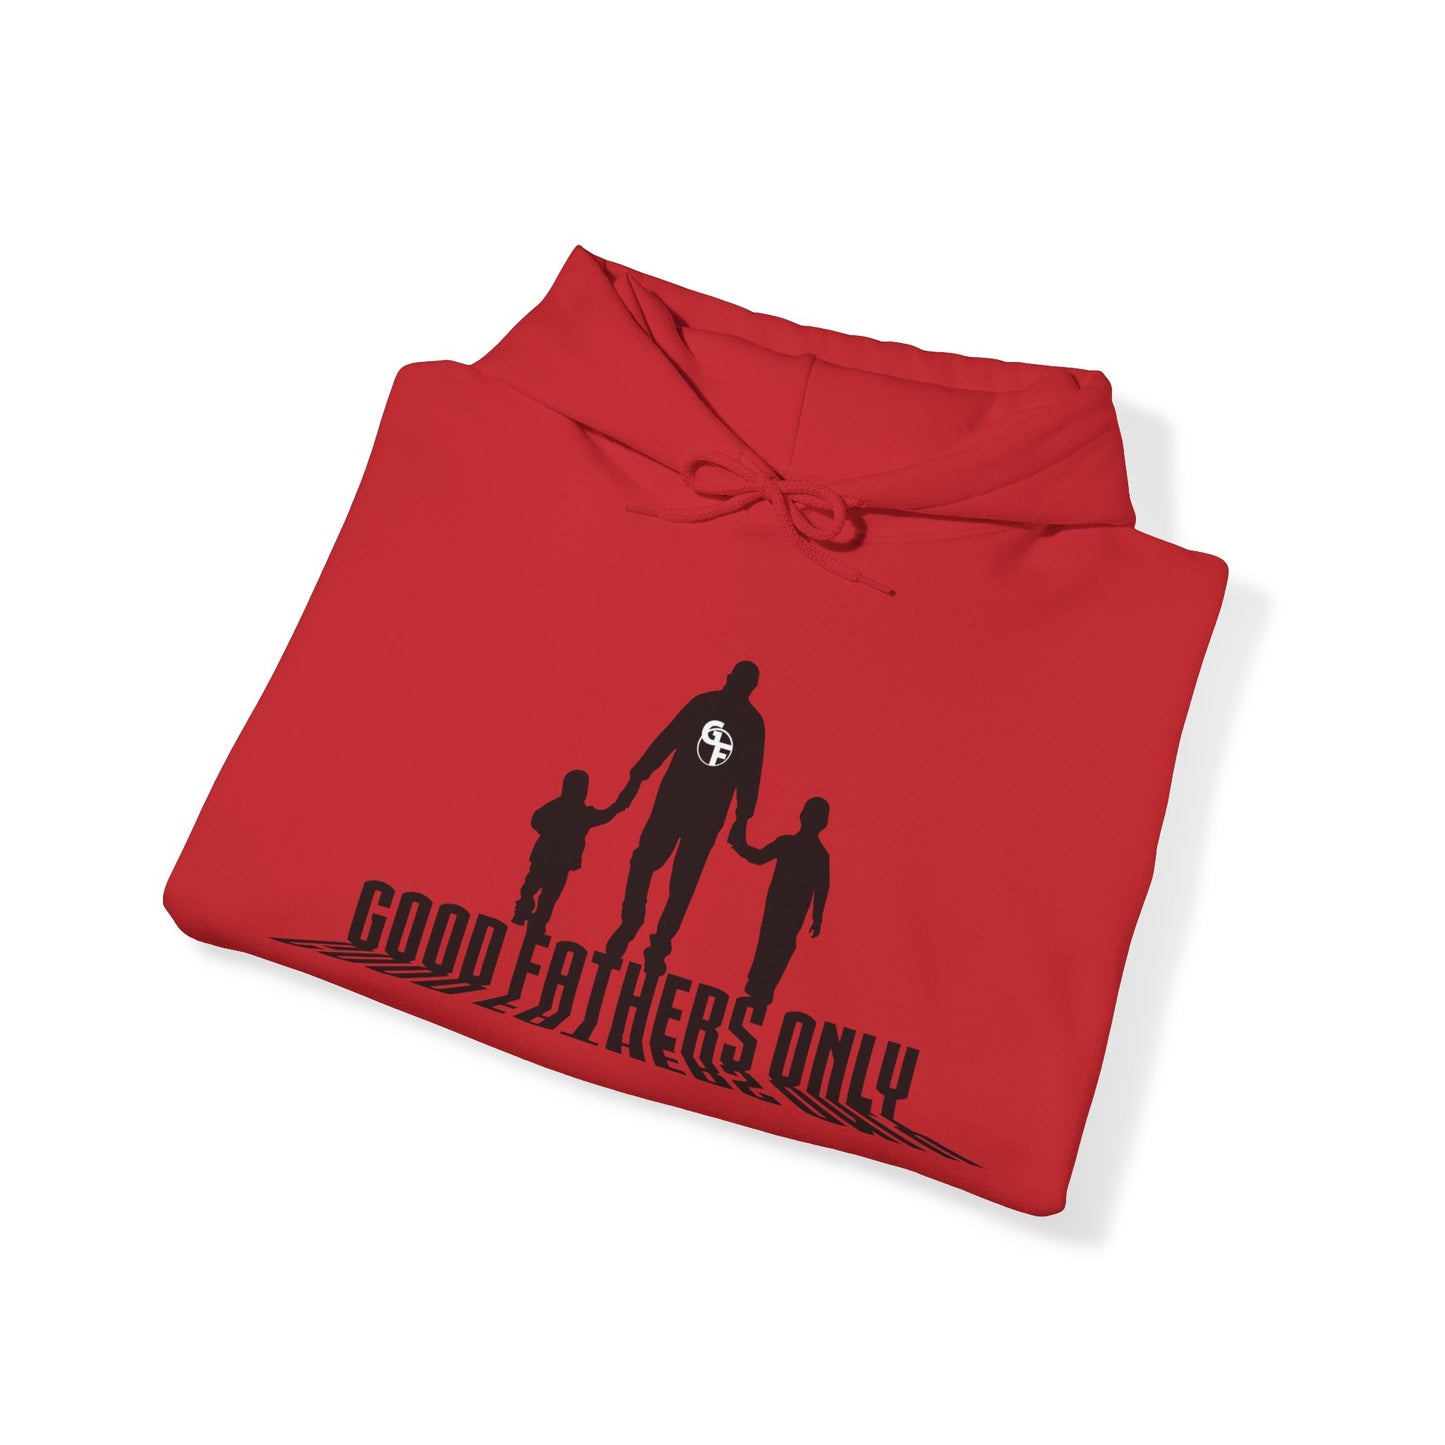 Good Fathers Only Hoodie